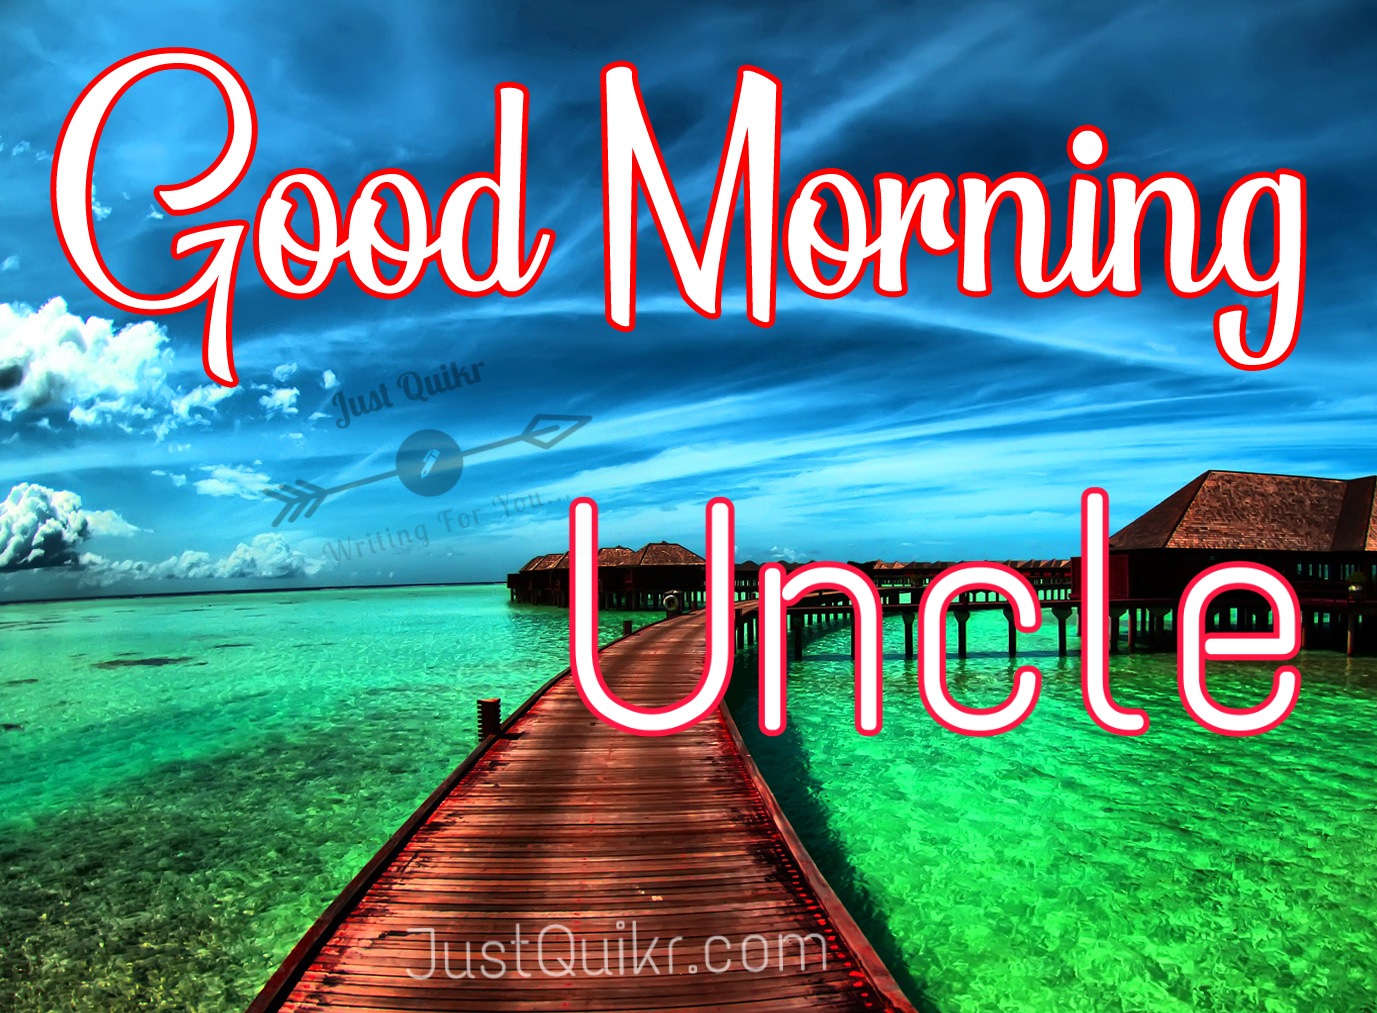 Good Morning Uncle Pics Images